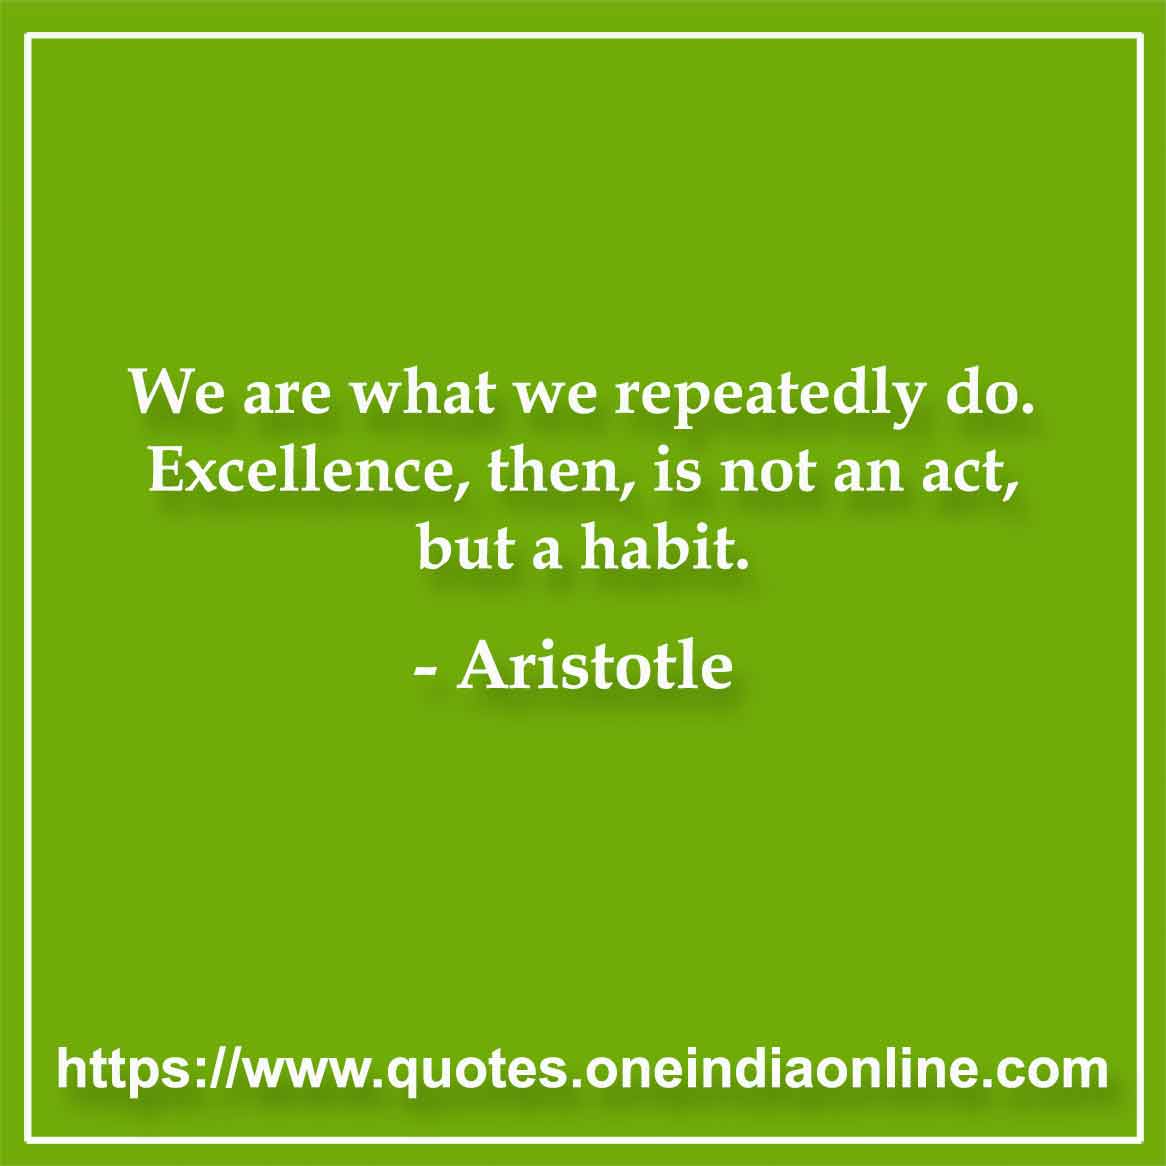 We are what we repeatedly do. Excellence, then, is not an act, but a habit.

- Aristotle